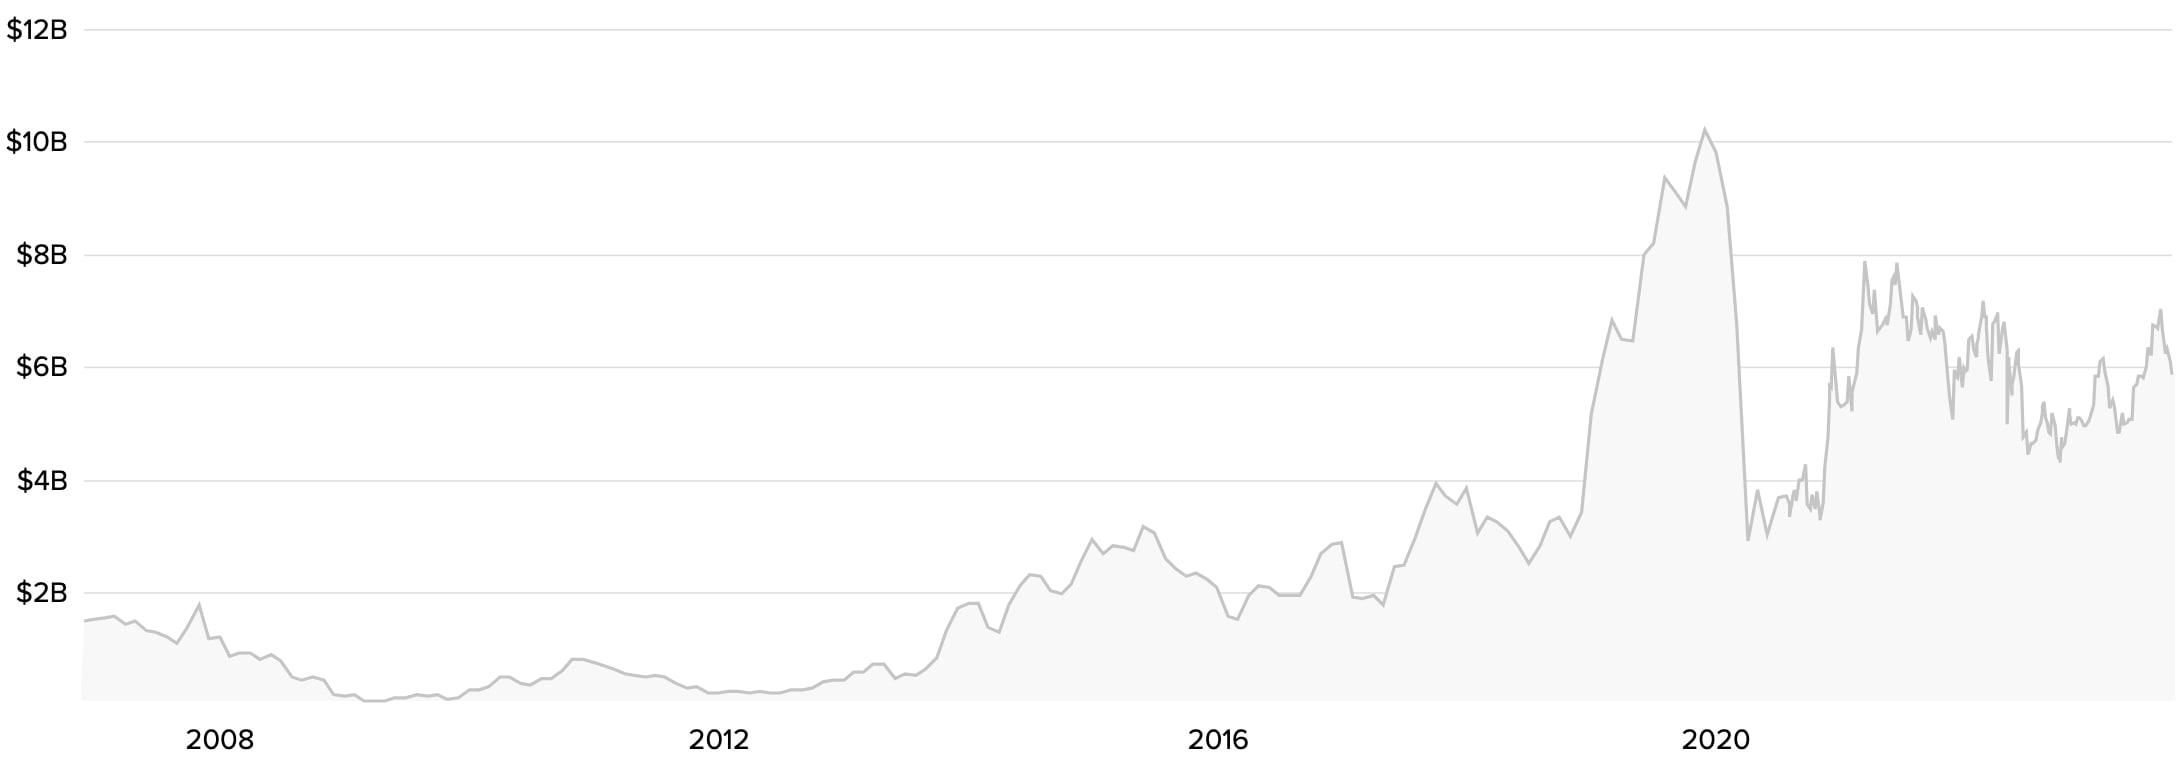 The market capitalization history of Air Canada